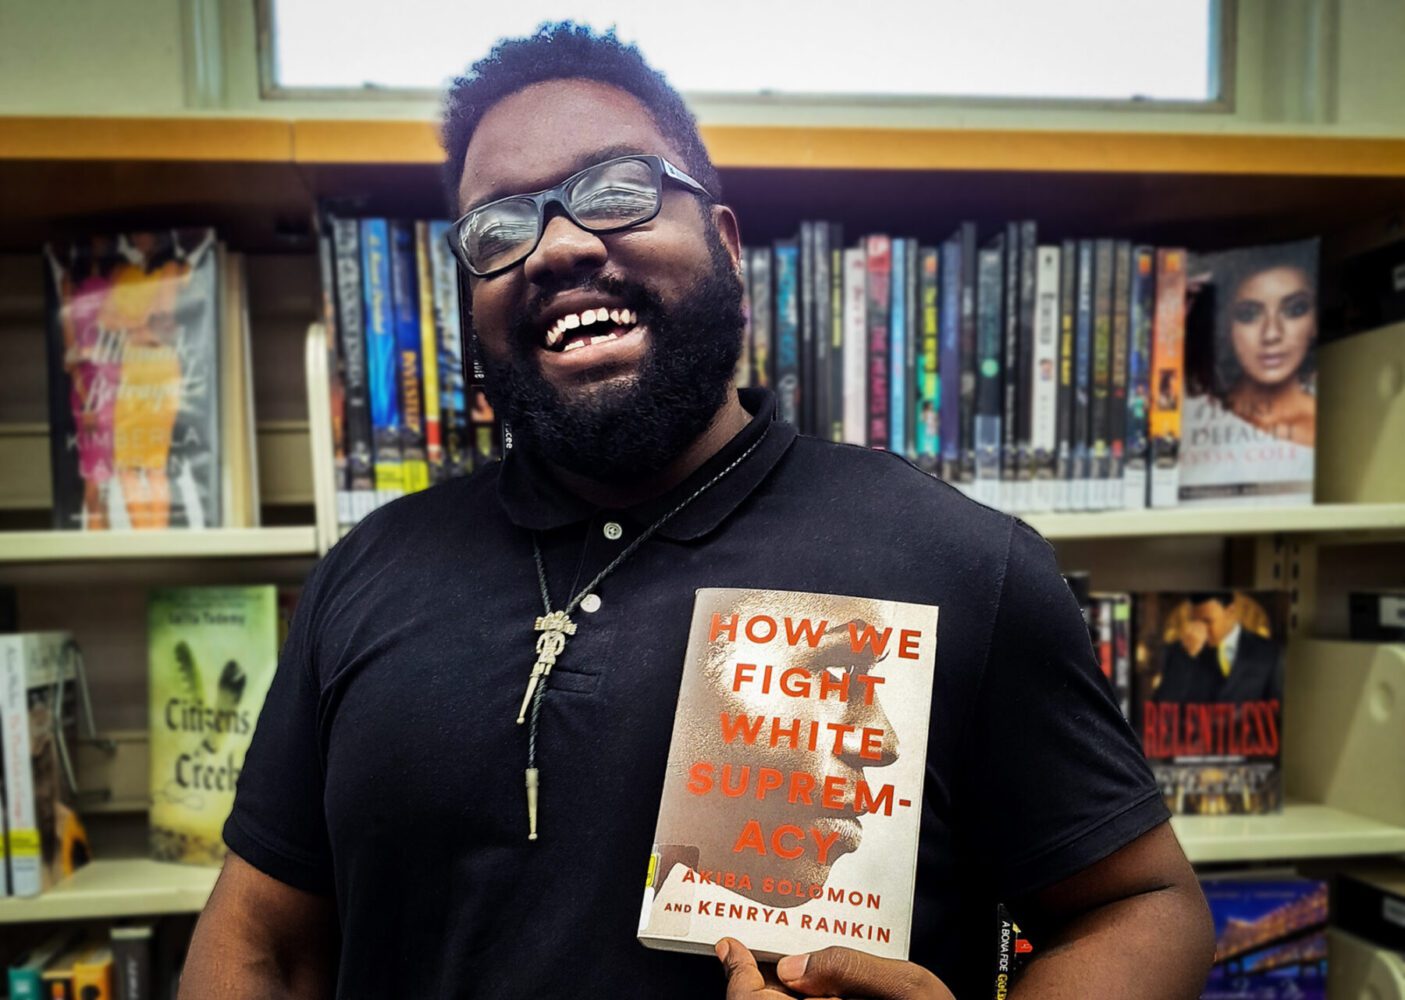 Craig Gill-Walker, Branch Manager at the North Avenue Public Library